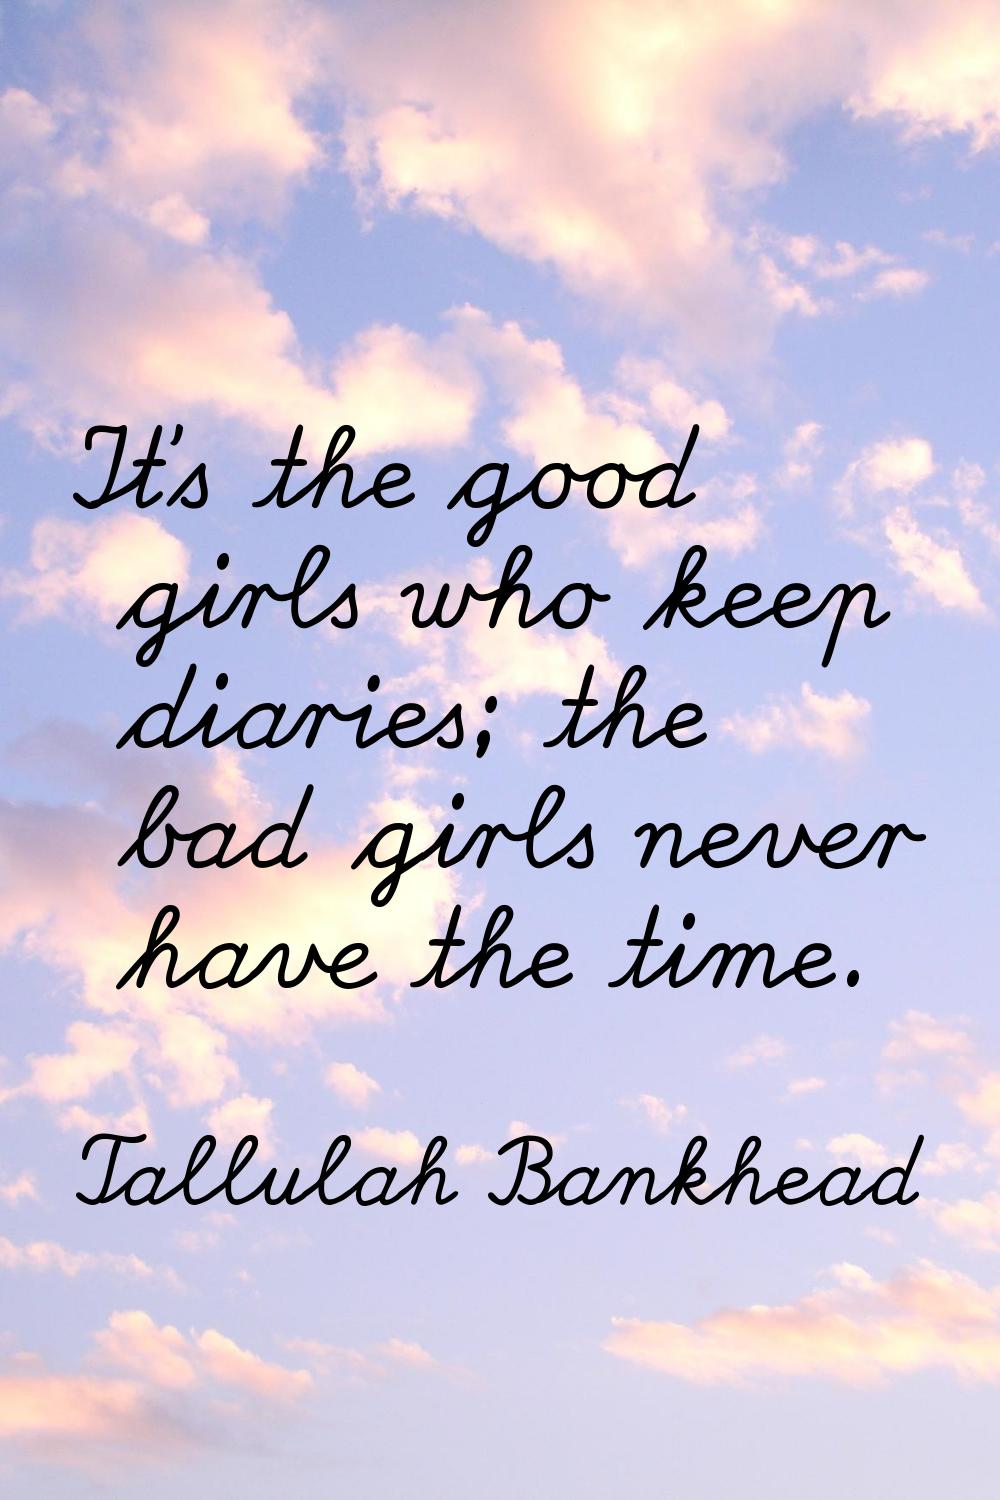 It's the good girls who keep diaries; the bad girls never have the time.